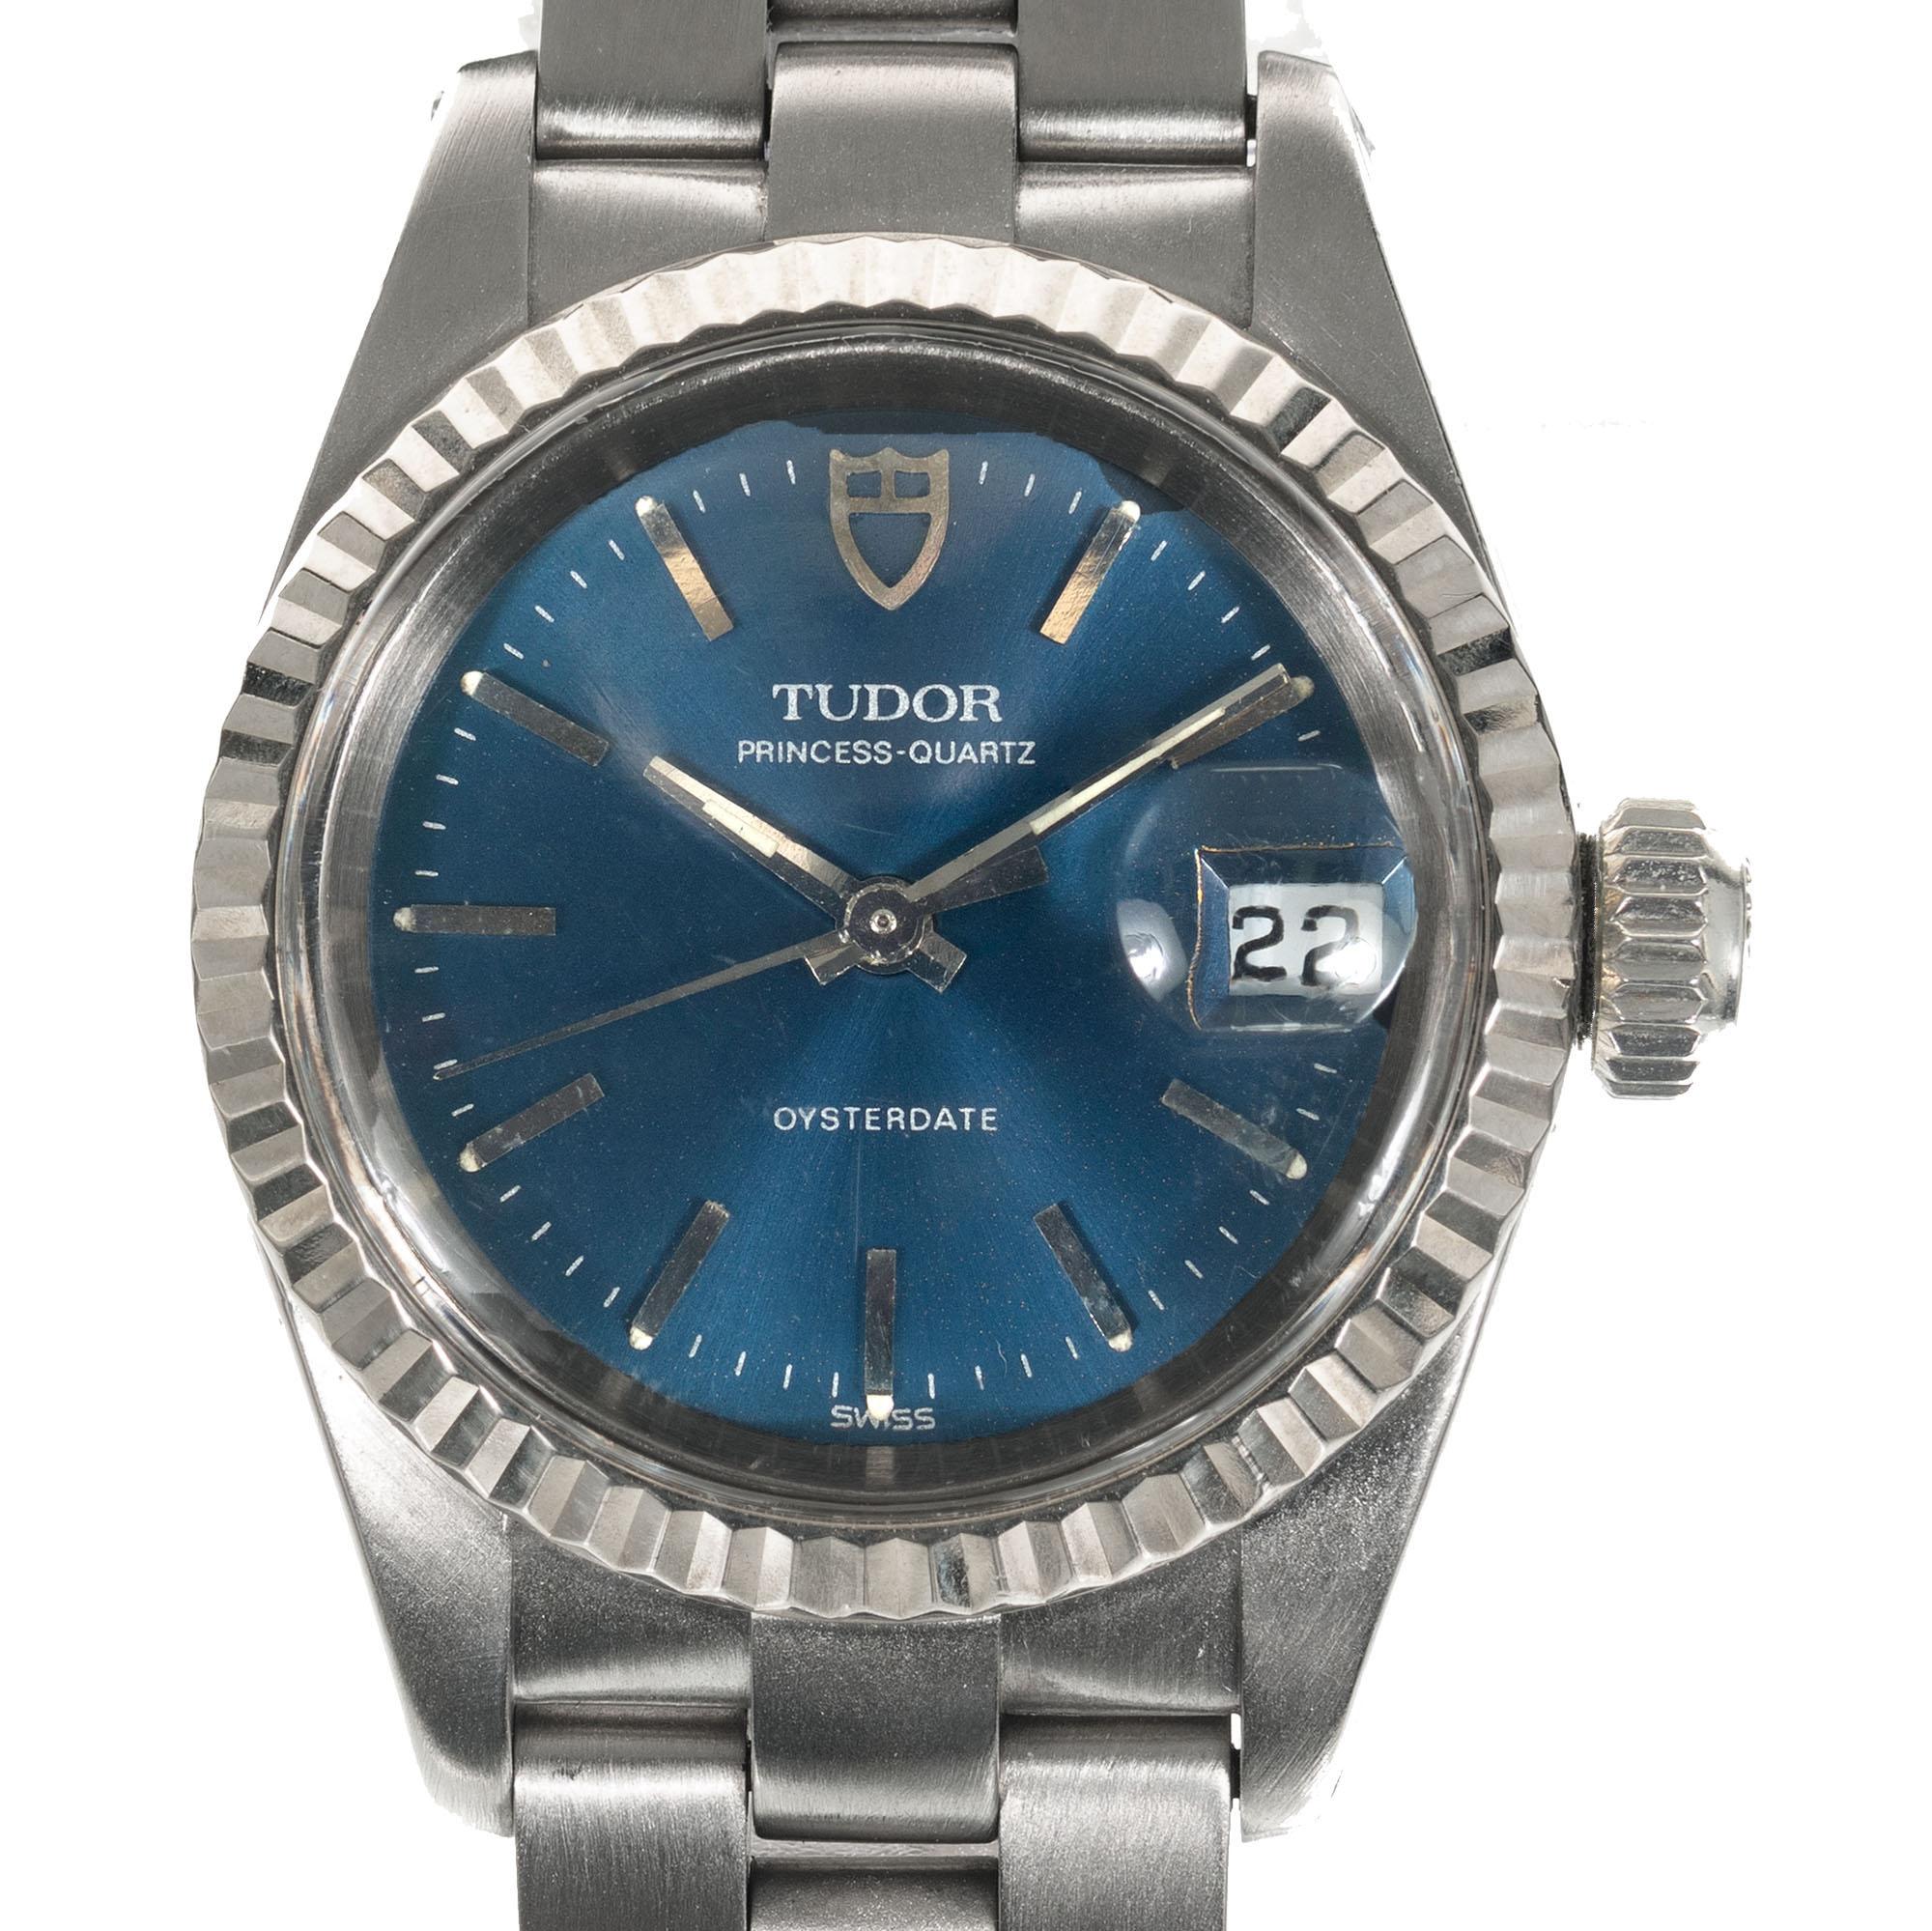 Blue dial Tudor by Rolex oyster date stainless steel quartz wristwatch. Oyster band

Length: 31.91mm
Width: 25mm
Band width at case: 13.35mm
Case thickness: 9.34mm
Band: Stainless Steel oyster band
Crystal: acrylic
Dial: navy
Outside case: Rolex